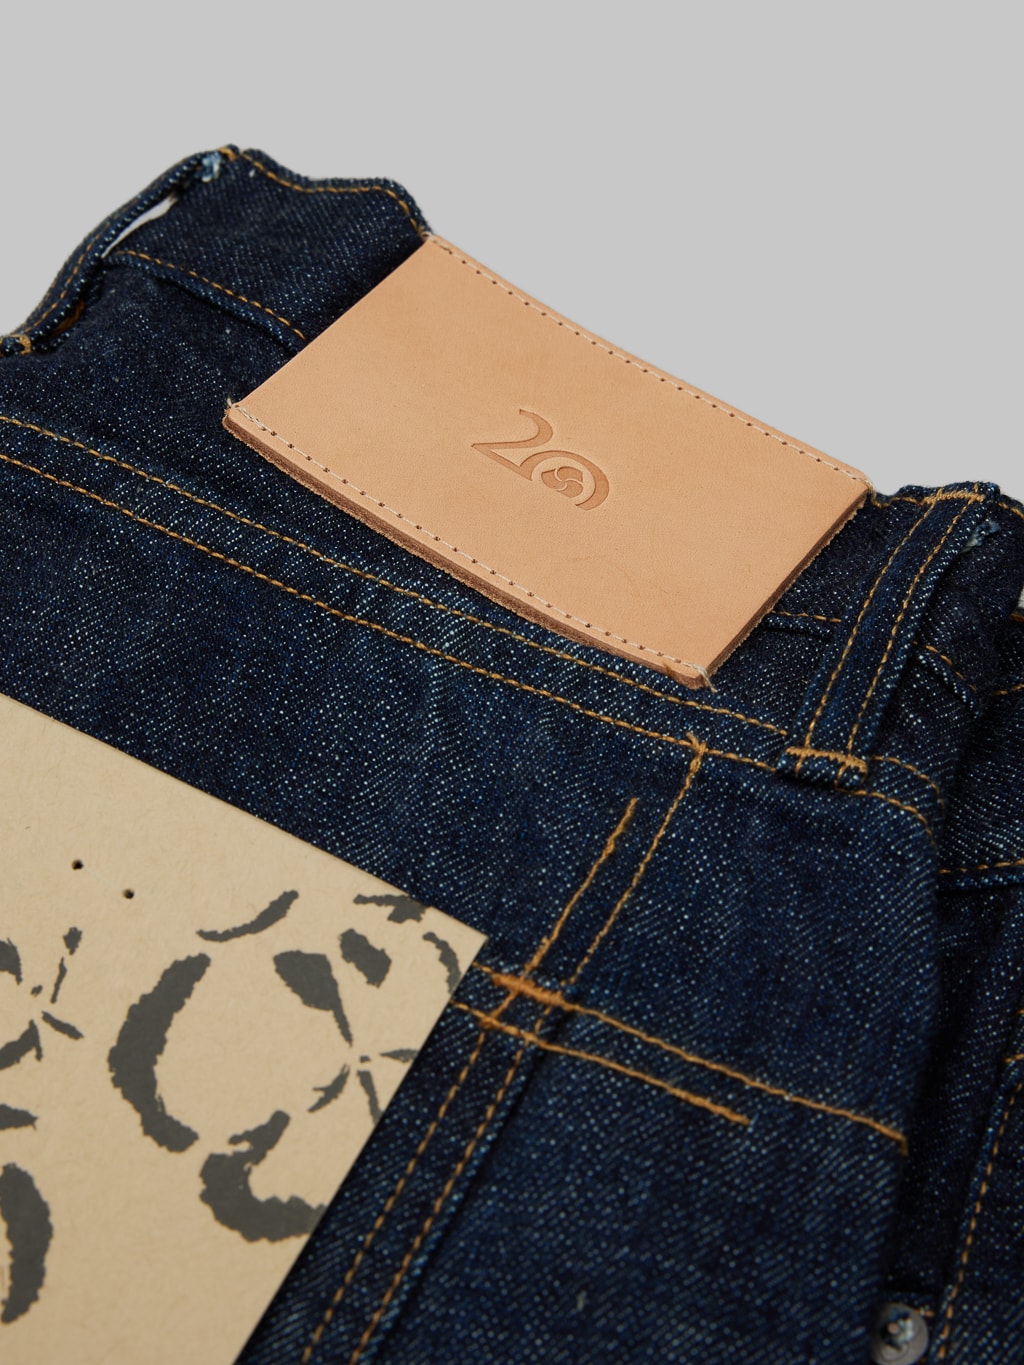 3sixteen CT 20th Anniversary Burkina Faso Classic Tapered Jeans leather patch